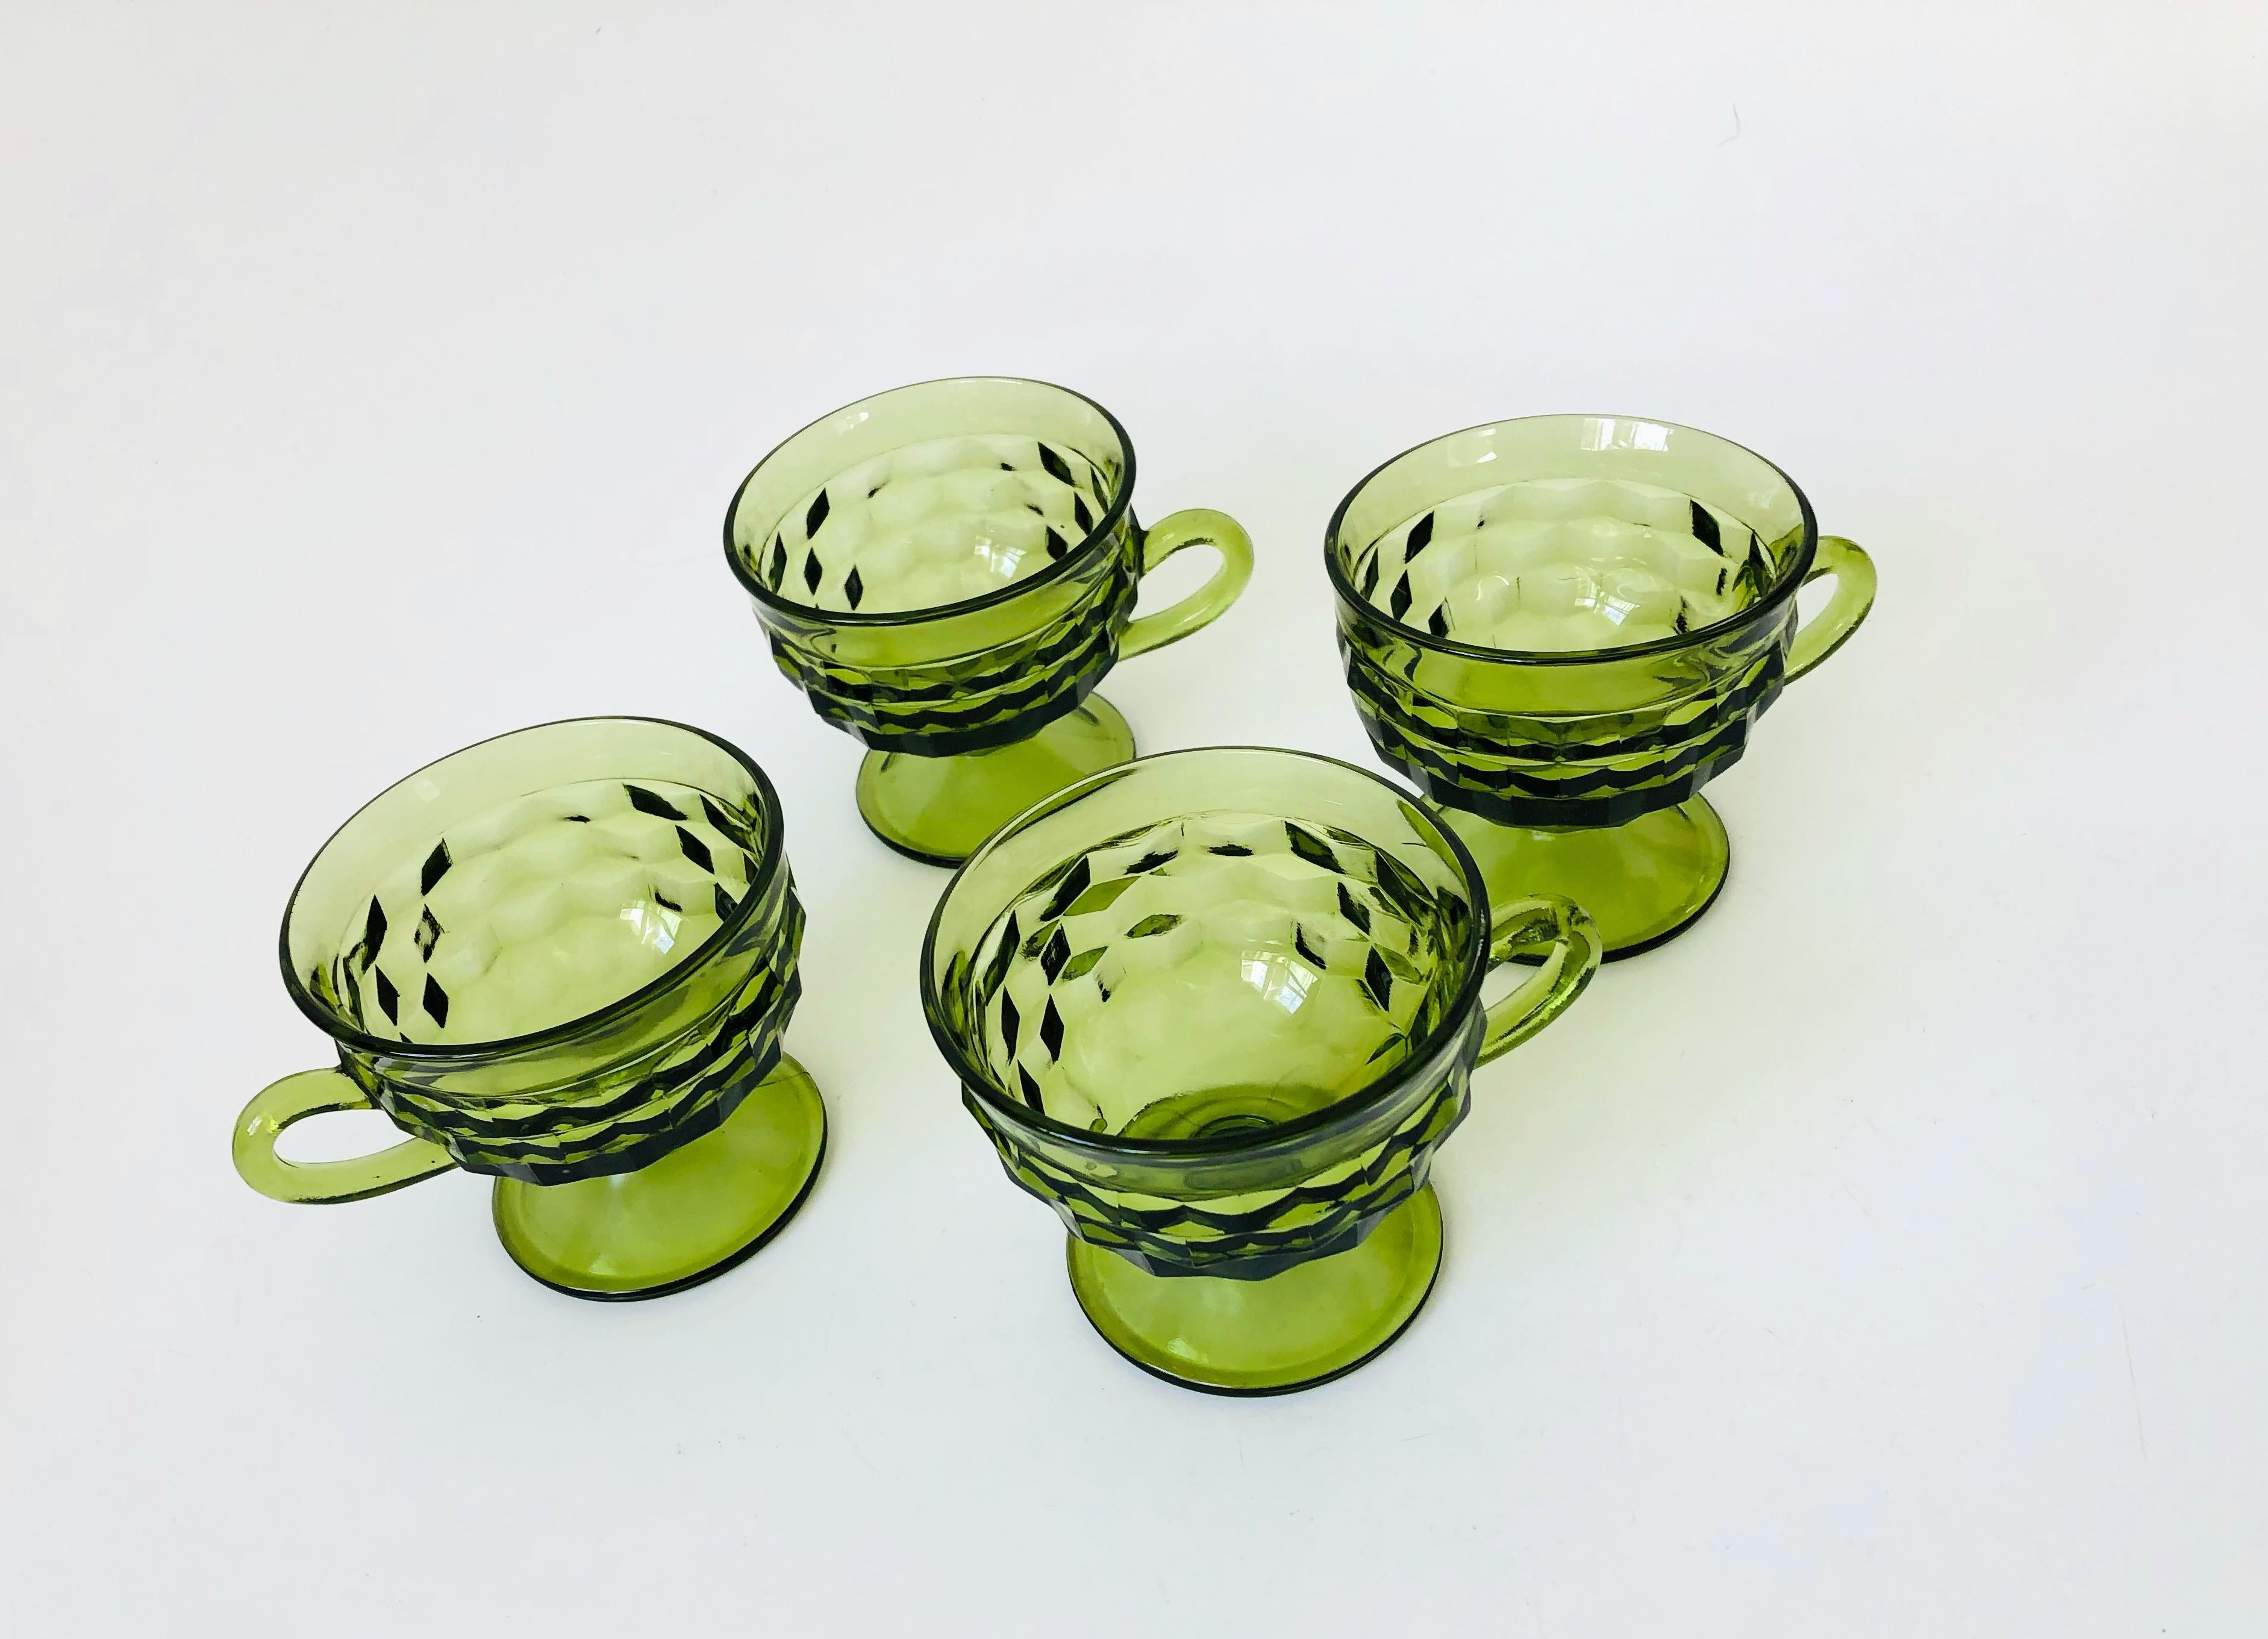 A set of 4 vintage coupe glasses with handles. Each with a cubist design in thick green glass. Made in the Whitehall pattern by Indiana Glass. Perfect for wine or champagne. Smooth interiors.
   